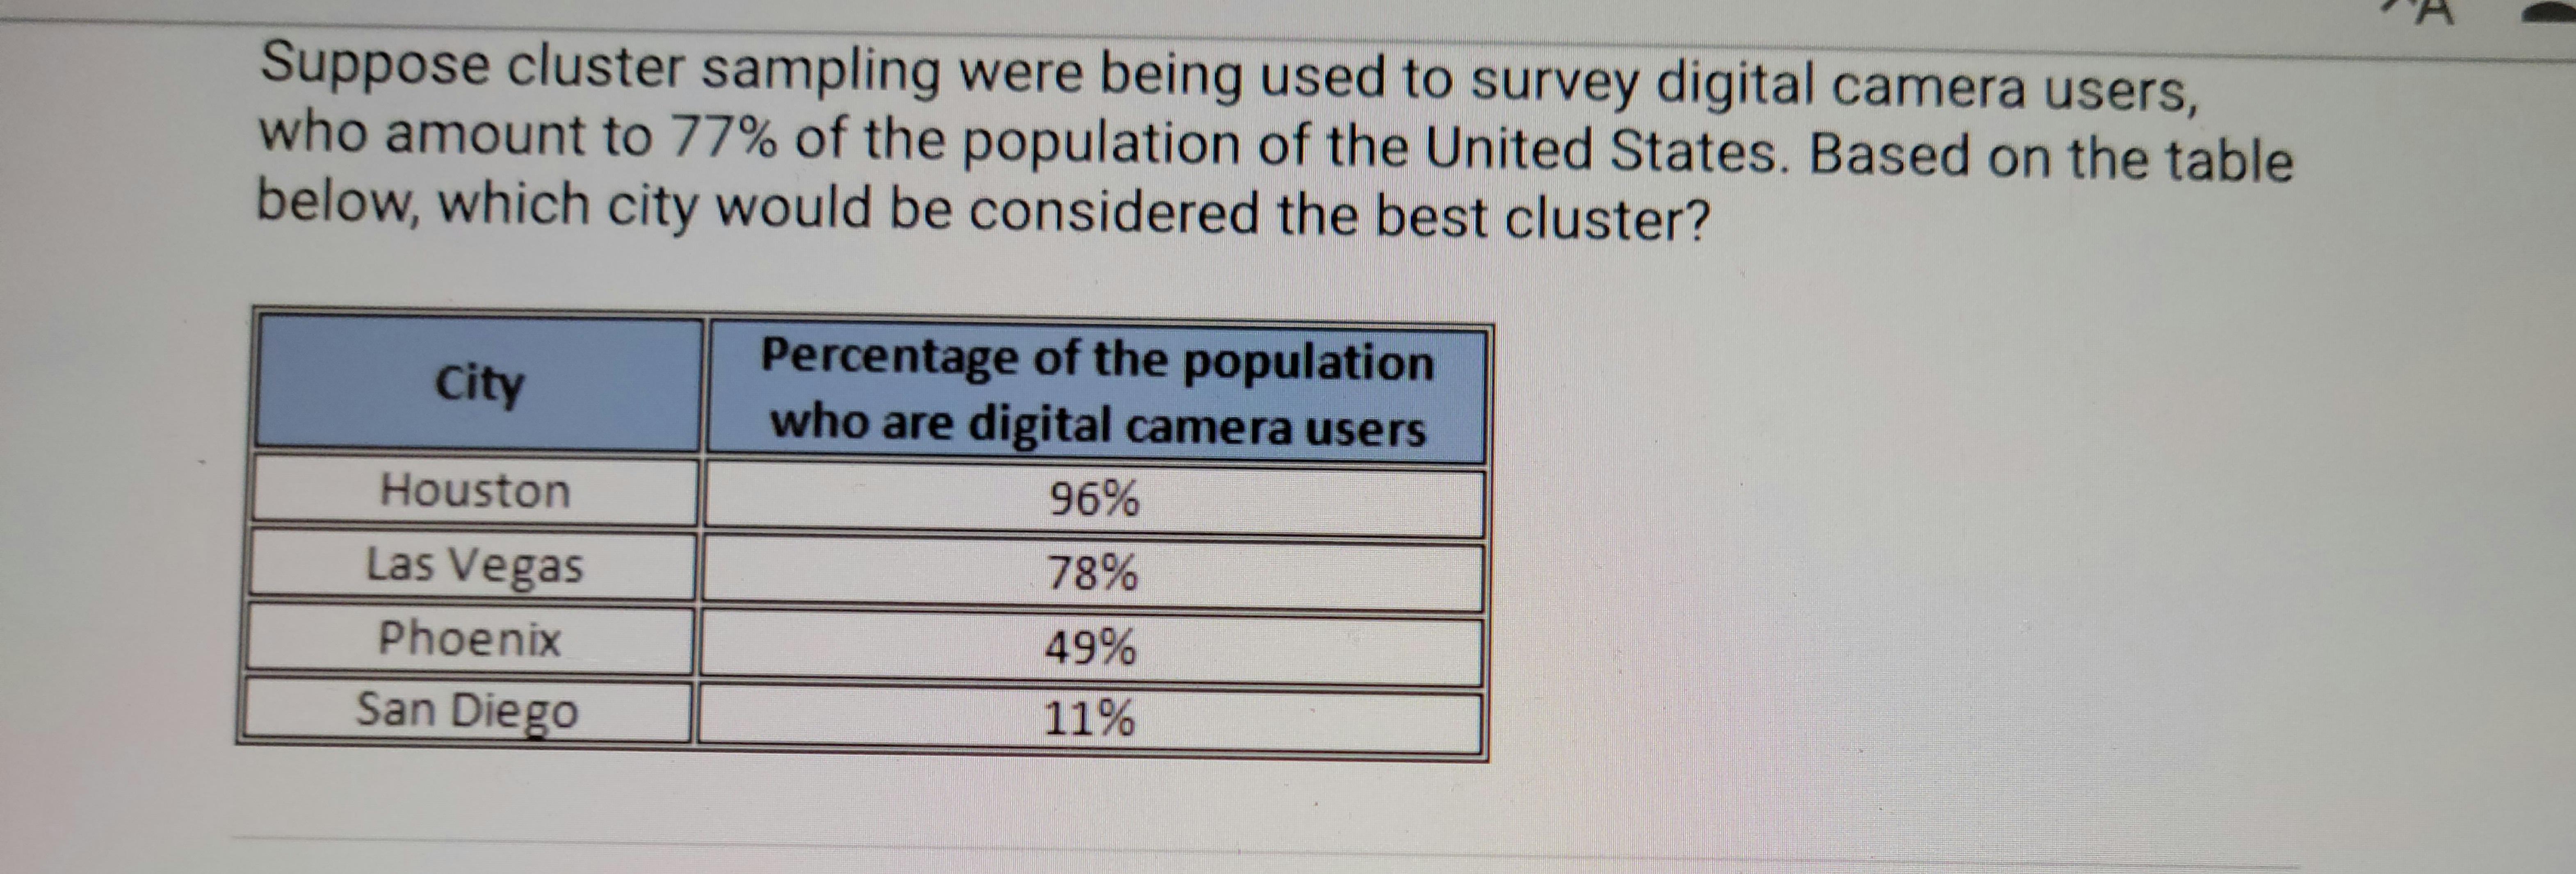 Suppose Cluster Sampling Were Being Used To Survey Digital Camera Users, Who Amount To 77% Of The Population